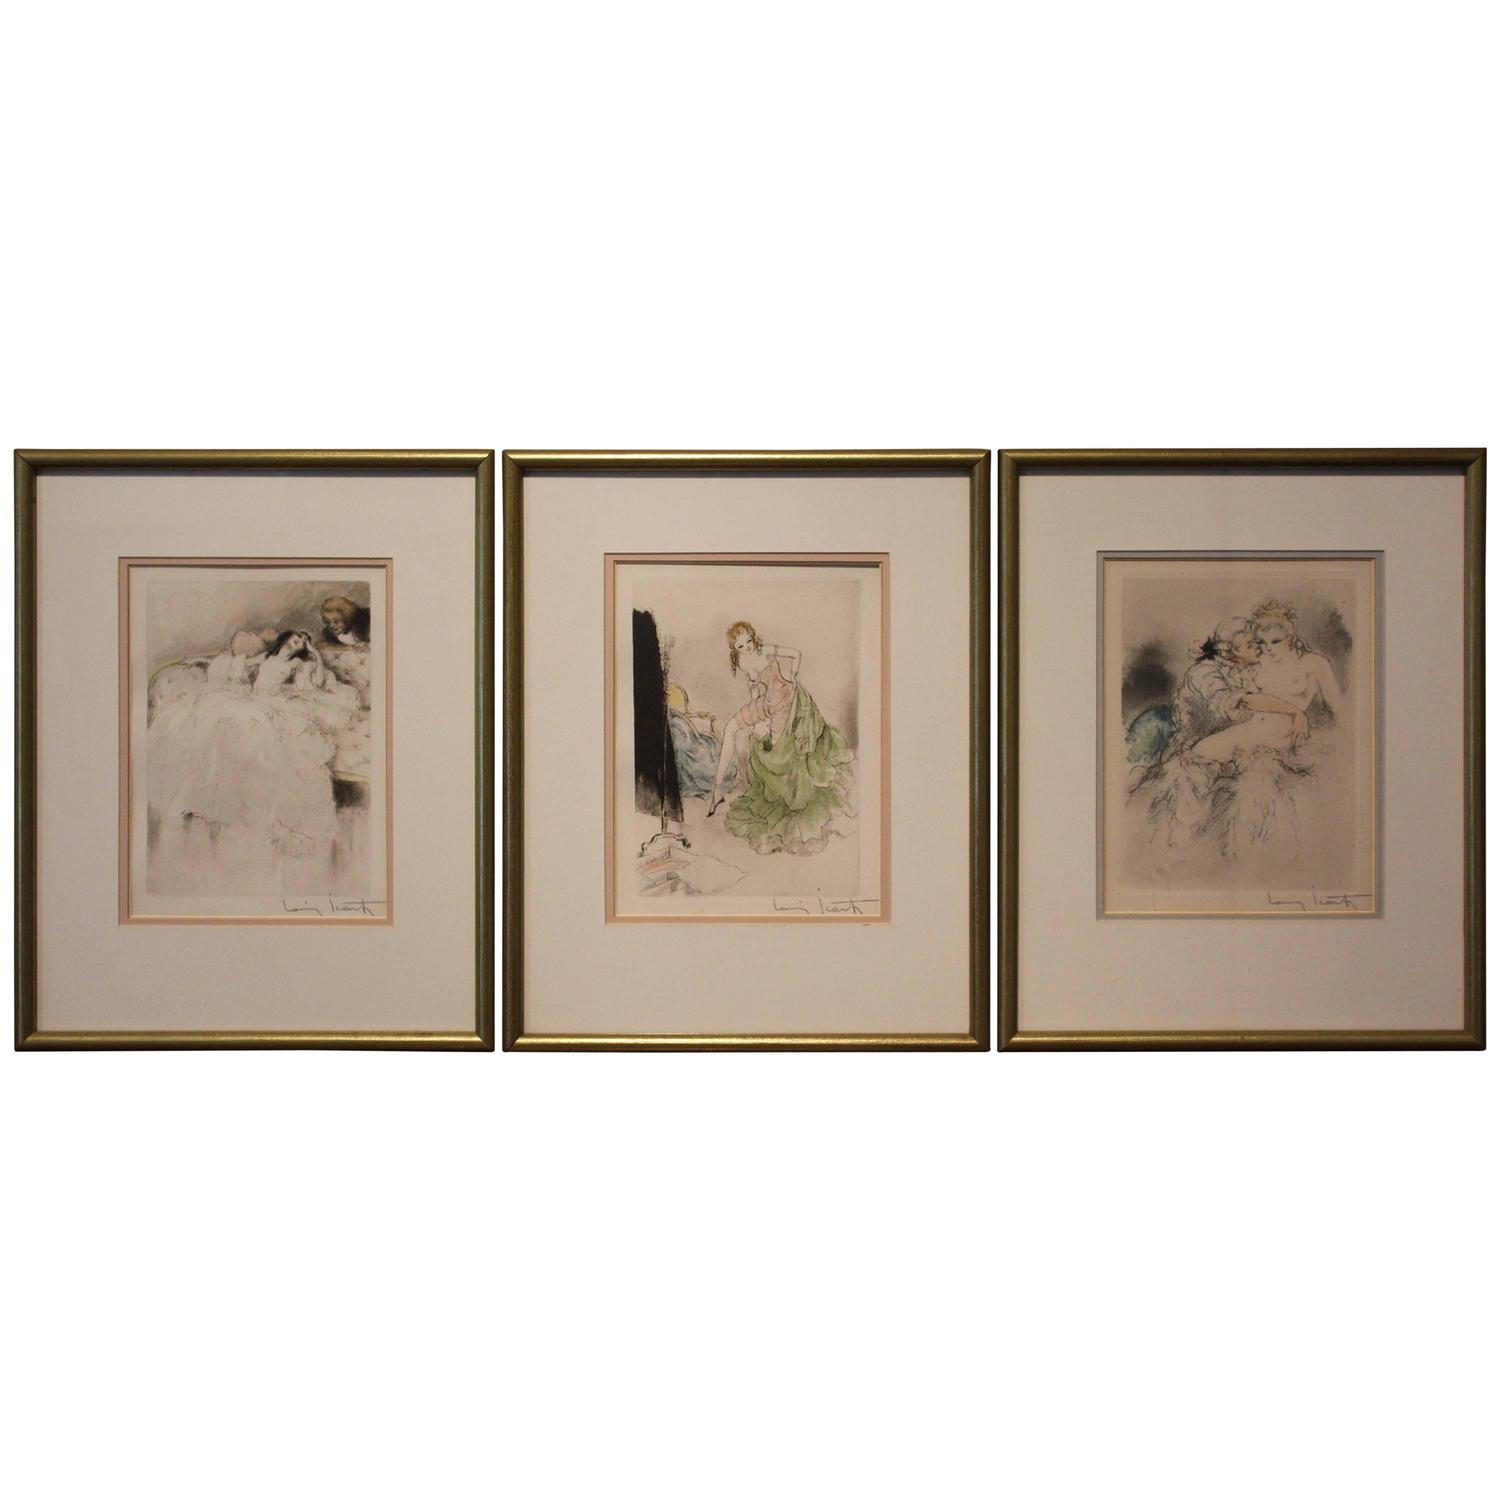 Three Louis Icart Erotic Etchings, 1938, Signed For Sale at 1stdibs